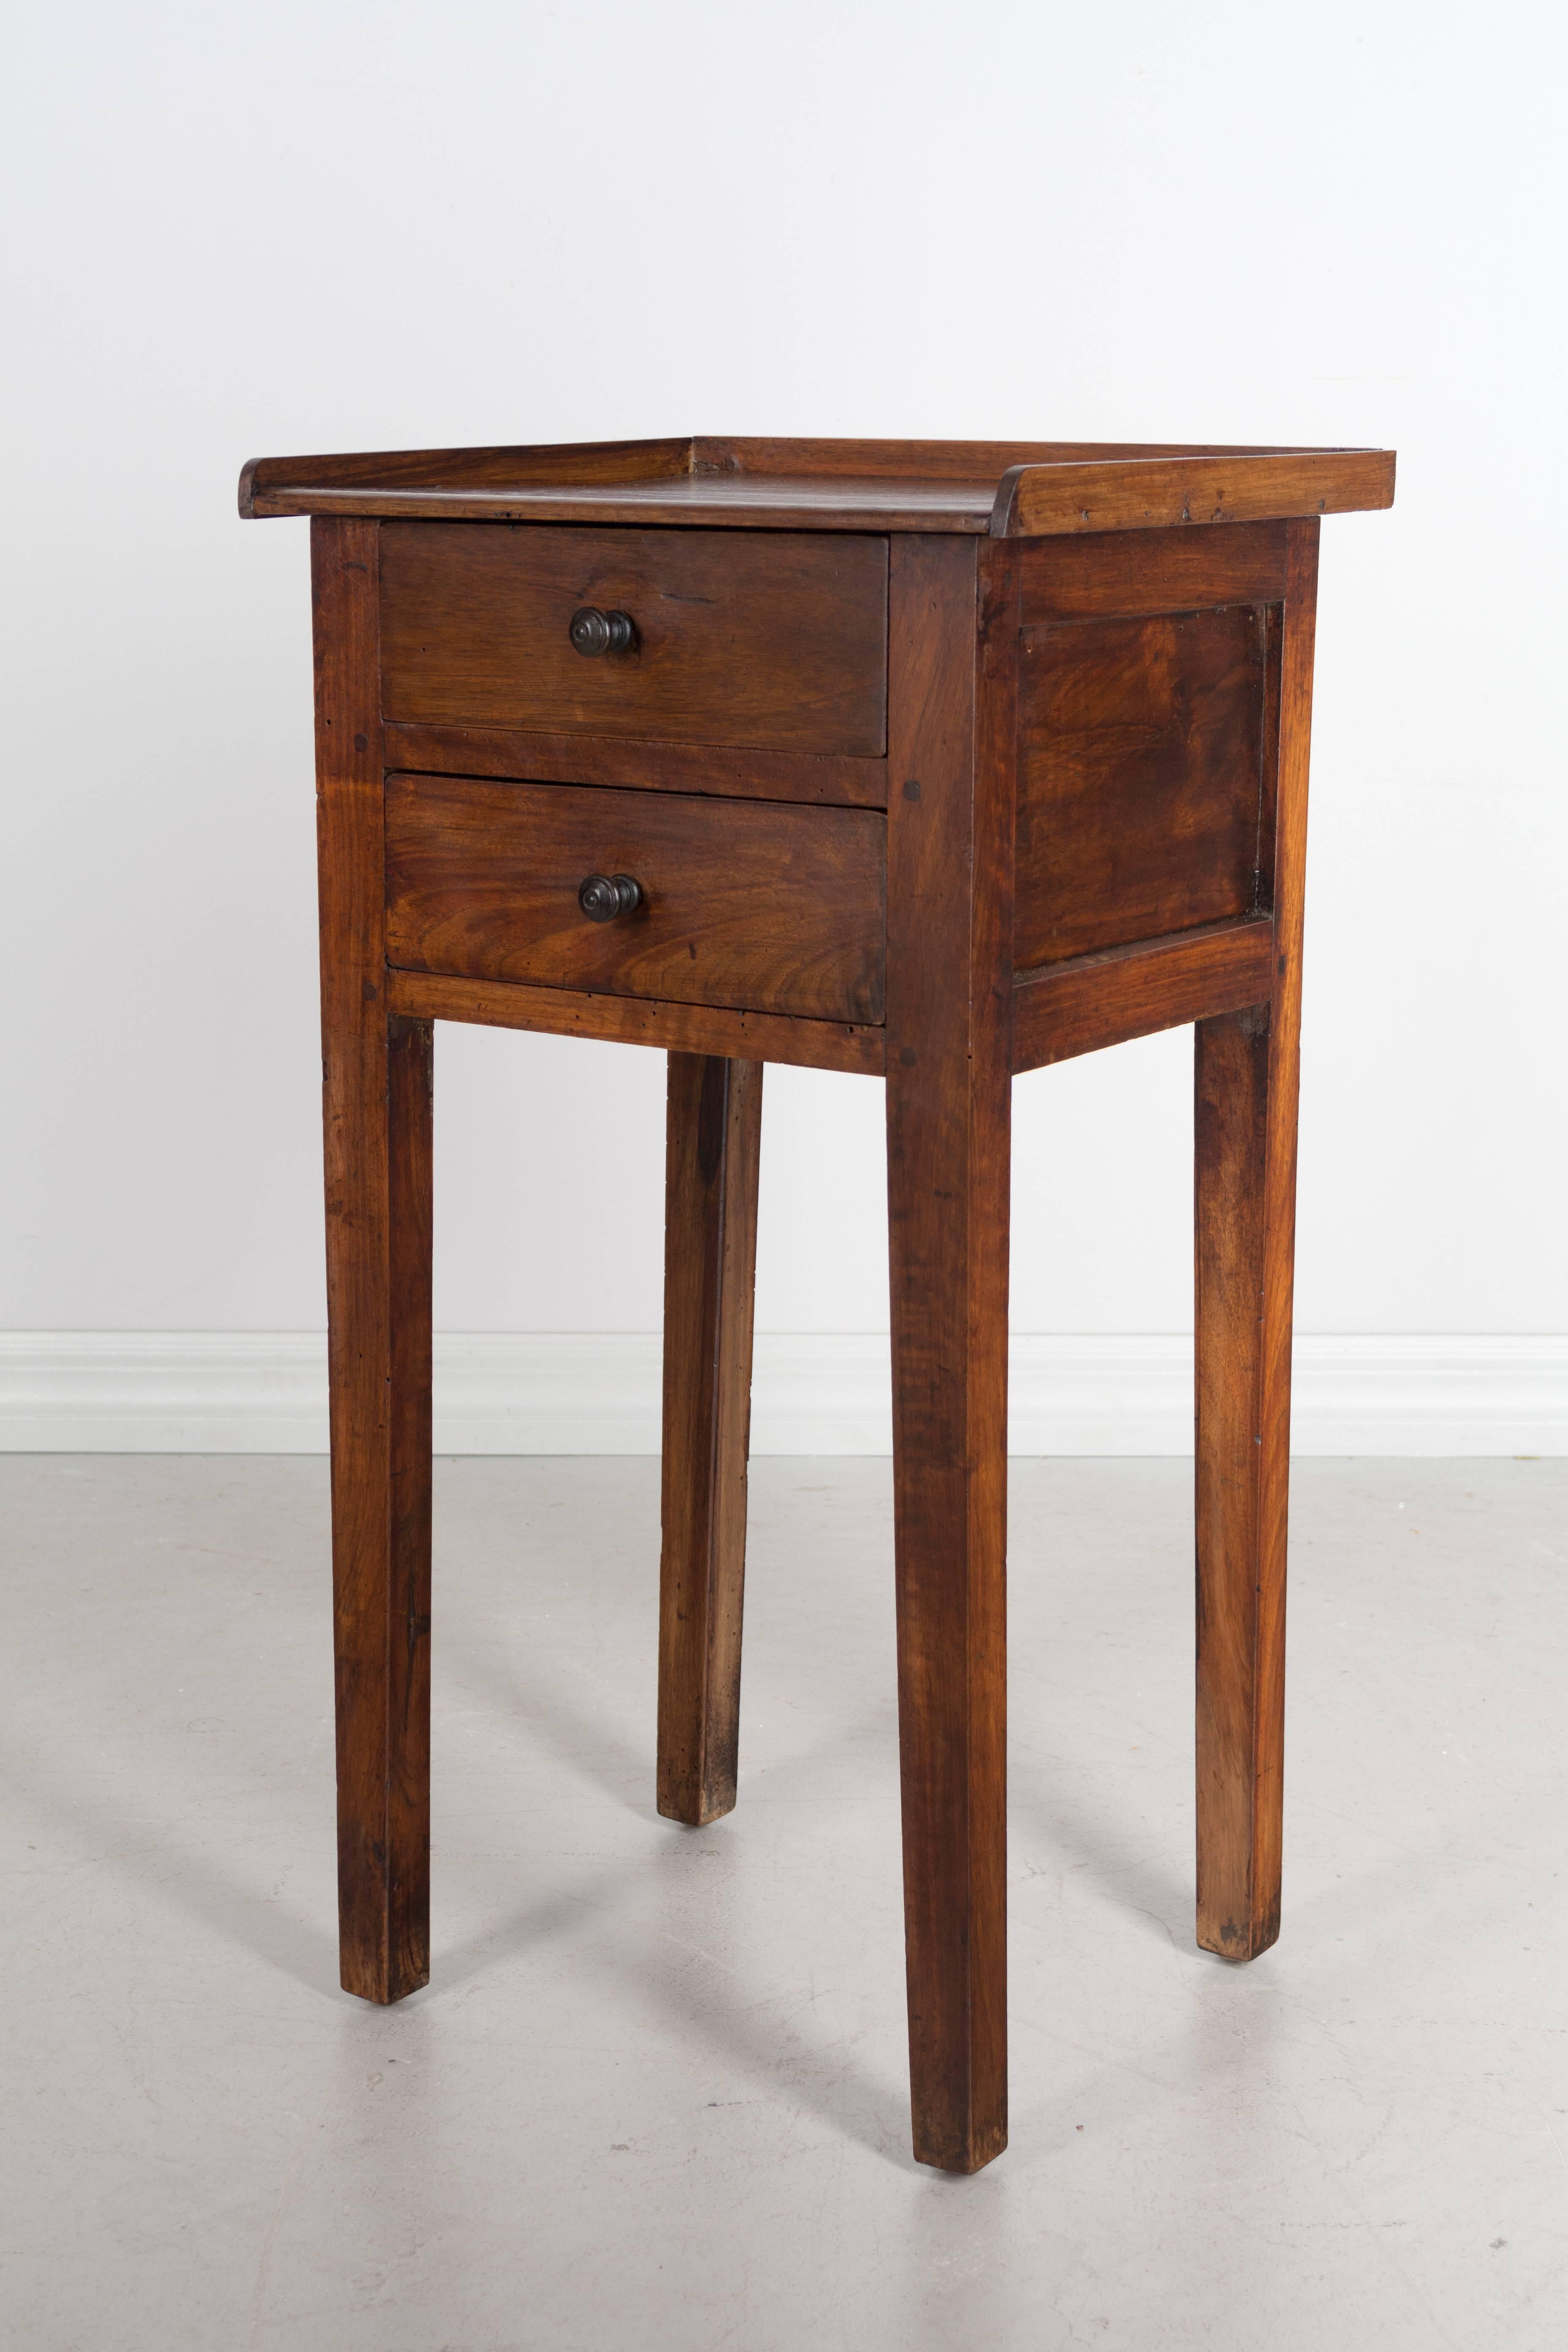 Small 19th century French side table with tapered legs and two dovetailed drawers. Made of solid walnut and finished on all sides. Pine as a secondary wood. Waxed finish.